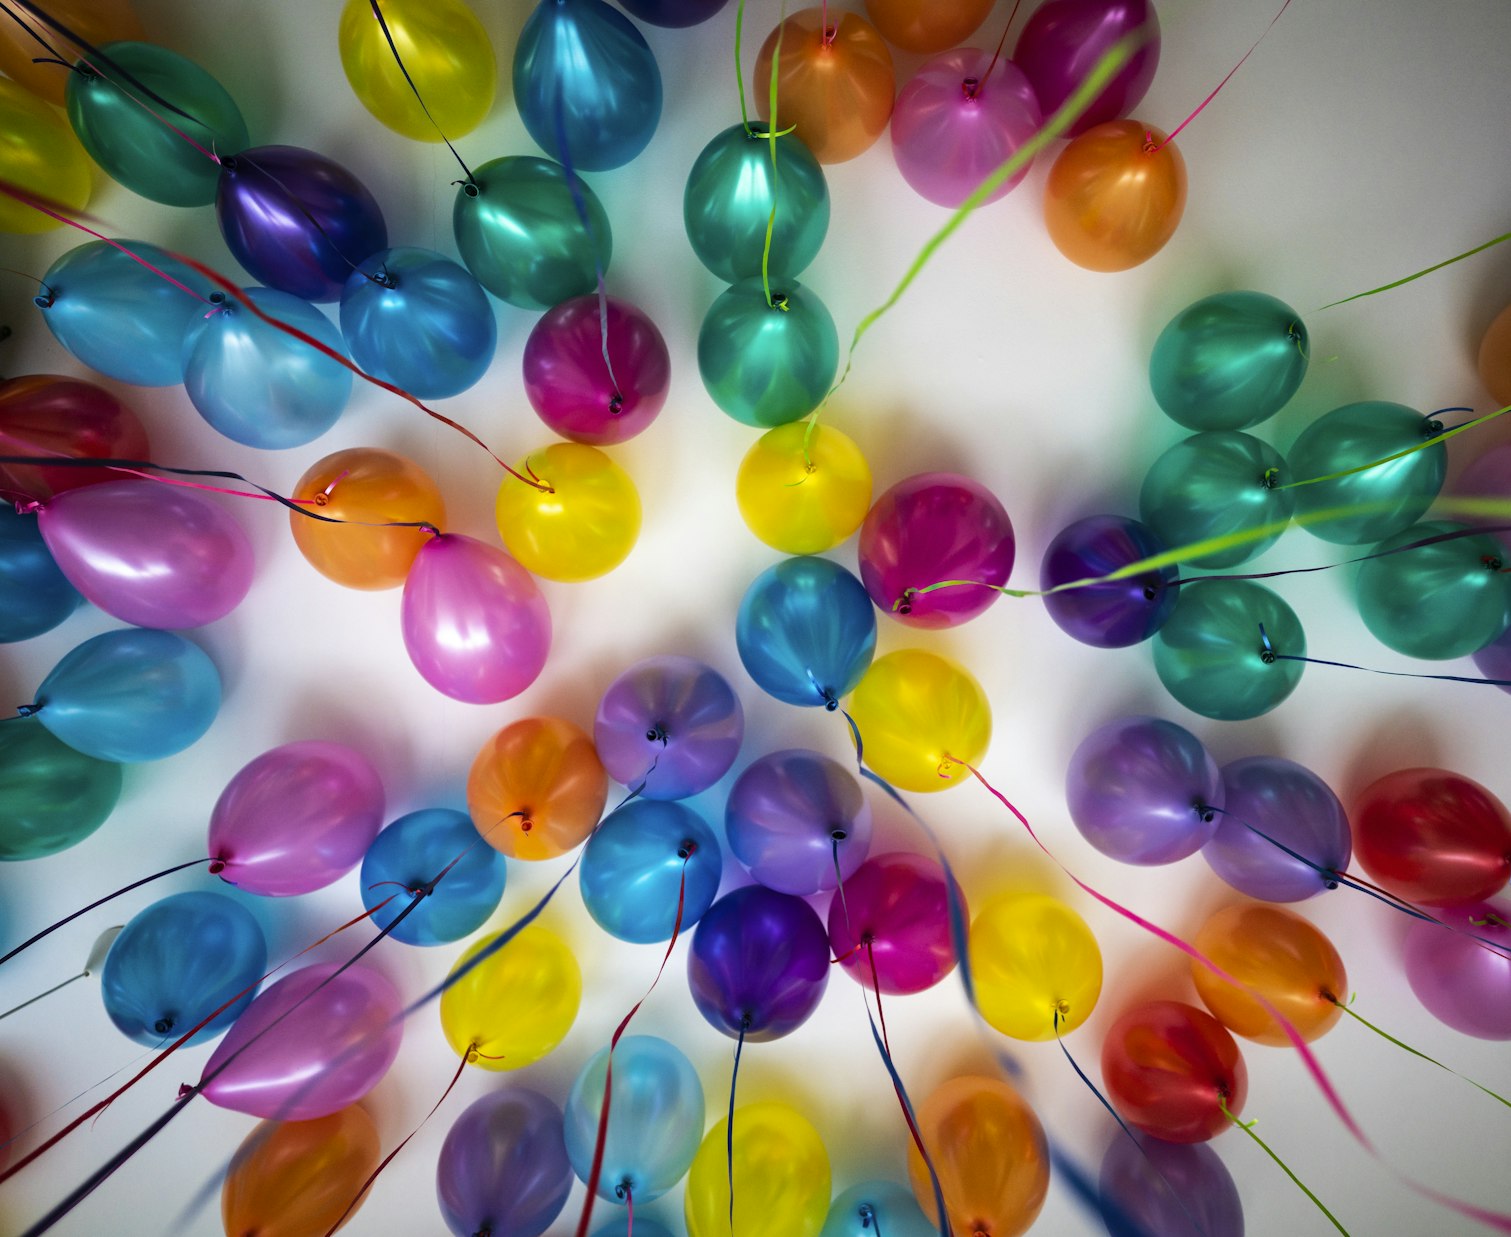 Balloons on the ceiling 